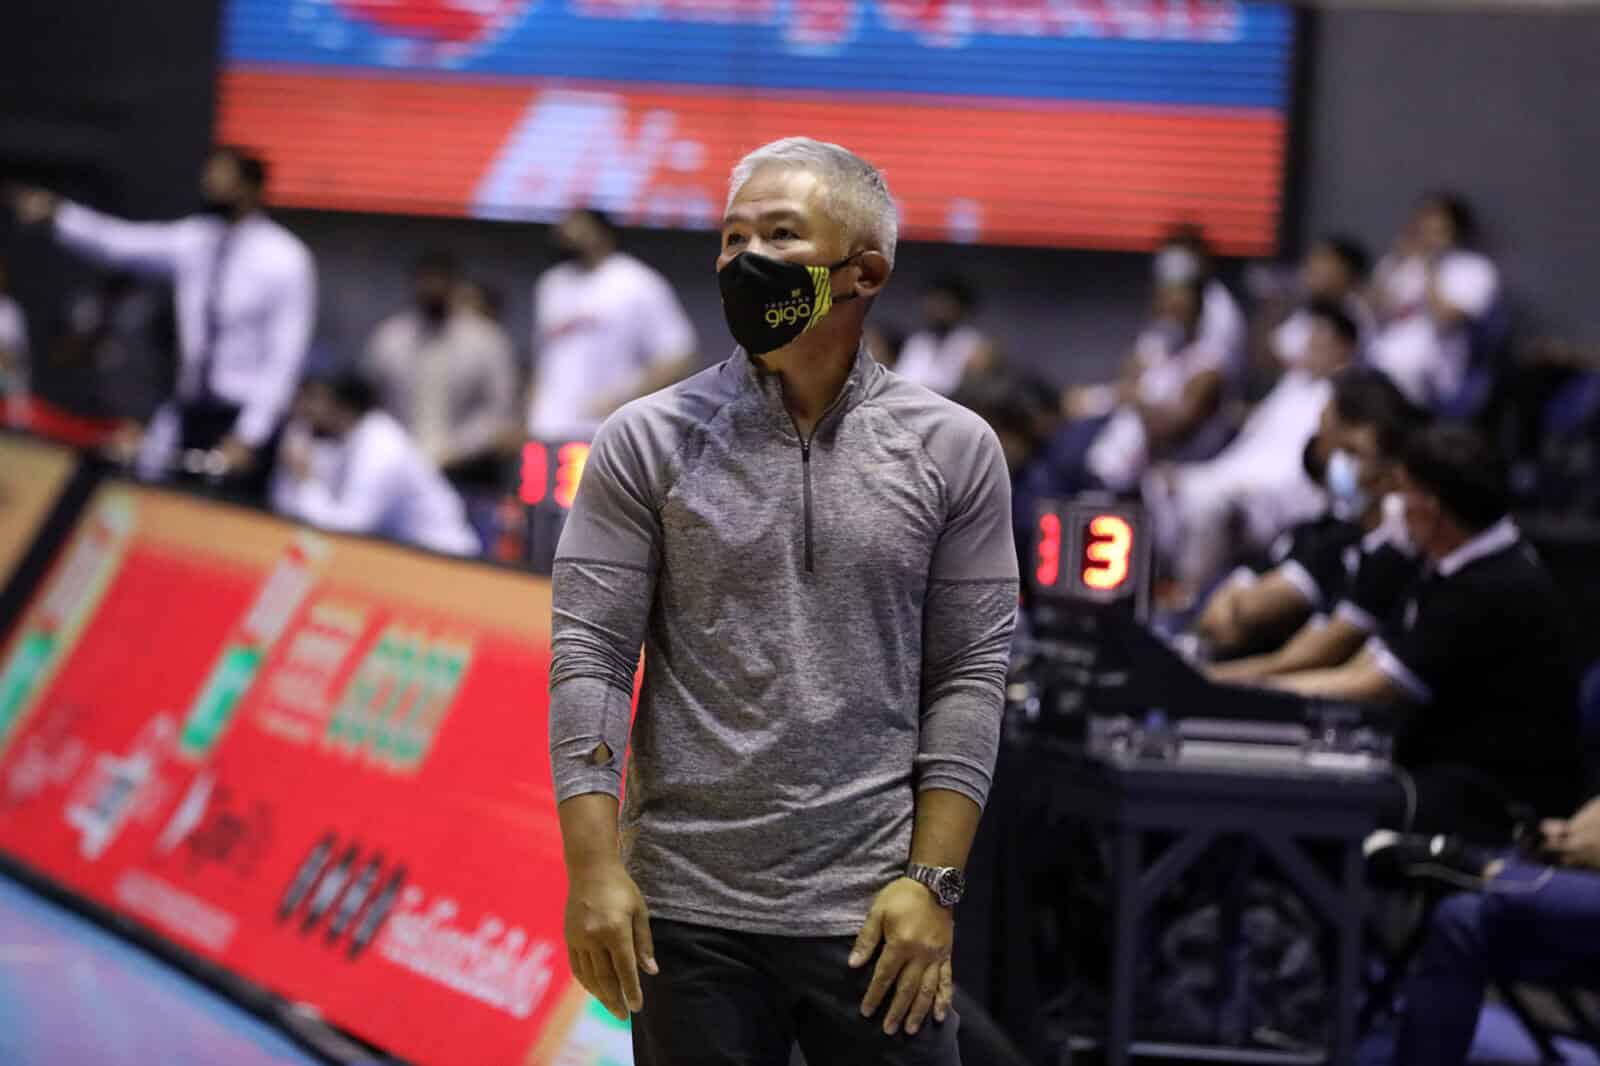 A man wearing a face mask joins Chot Reyes on a basketball court.